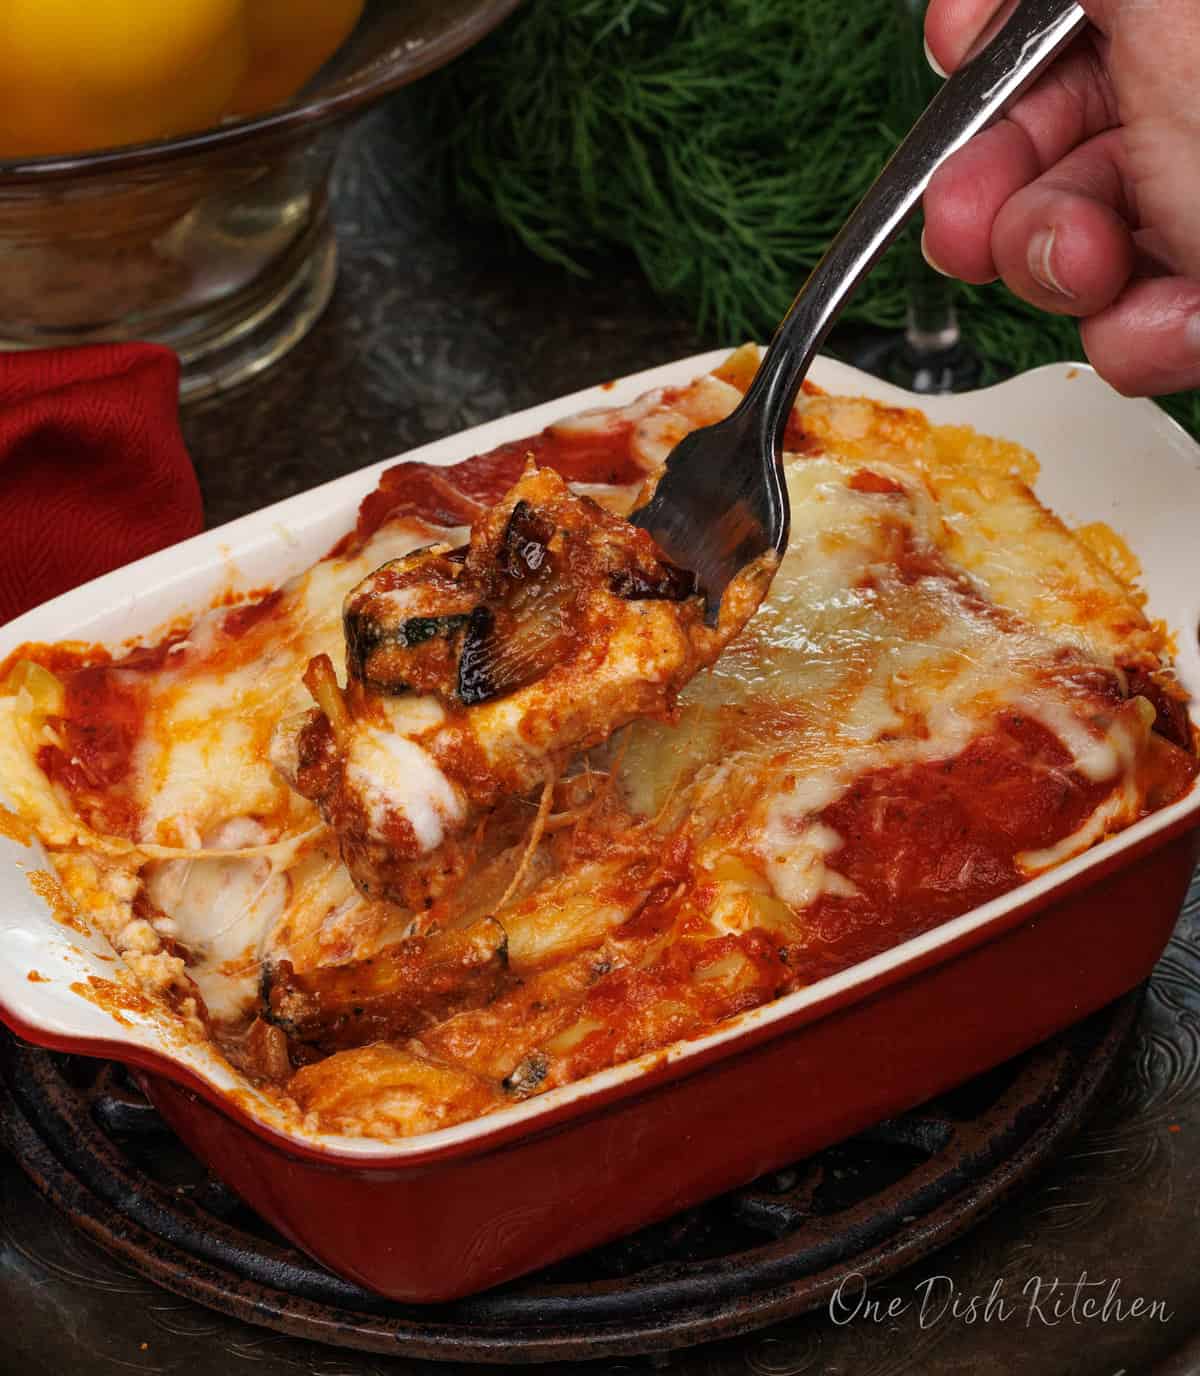 A small vegetable lasagna on a silver tray next to a glass of wine, a fork and a red napkin